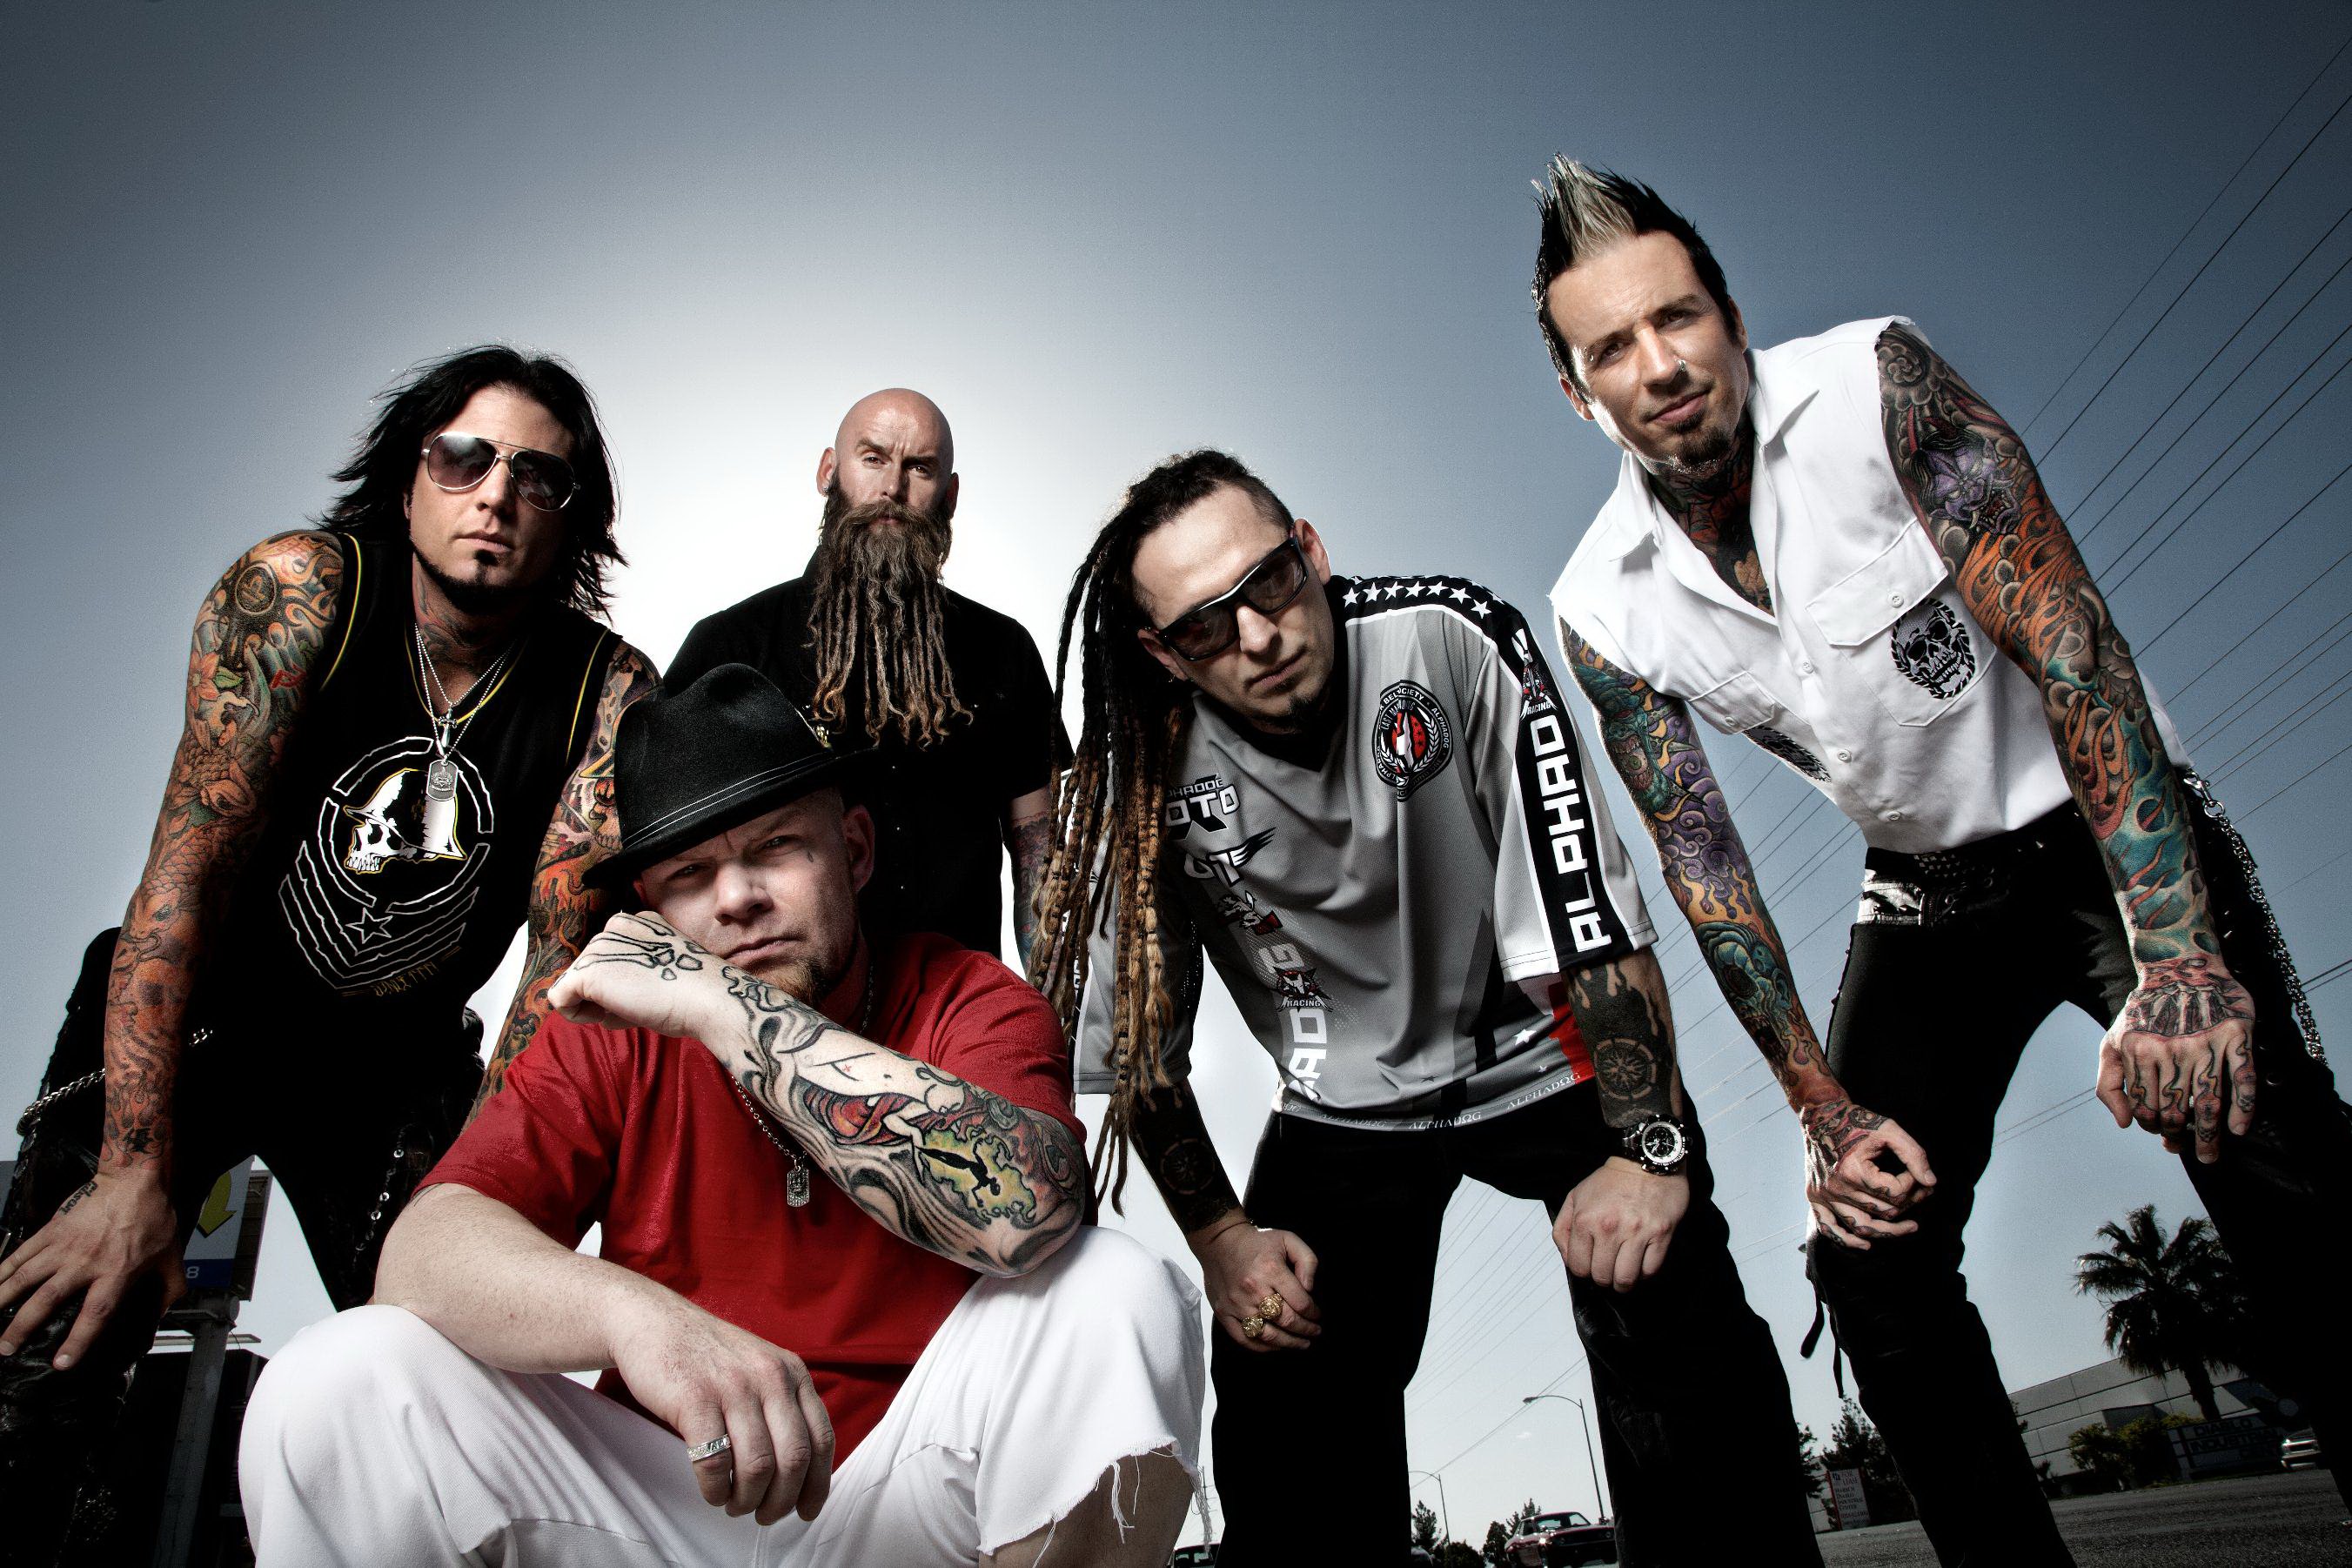 Boots and Blood — Five Finger Death Punch | Last.fm